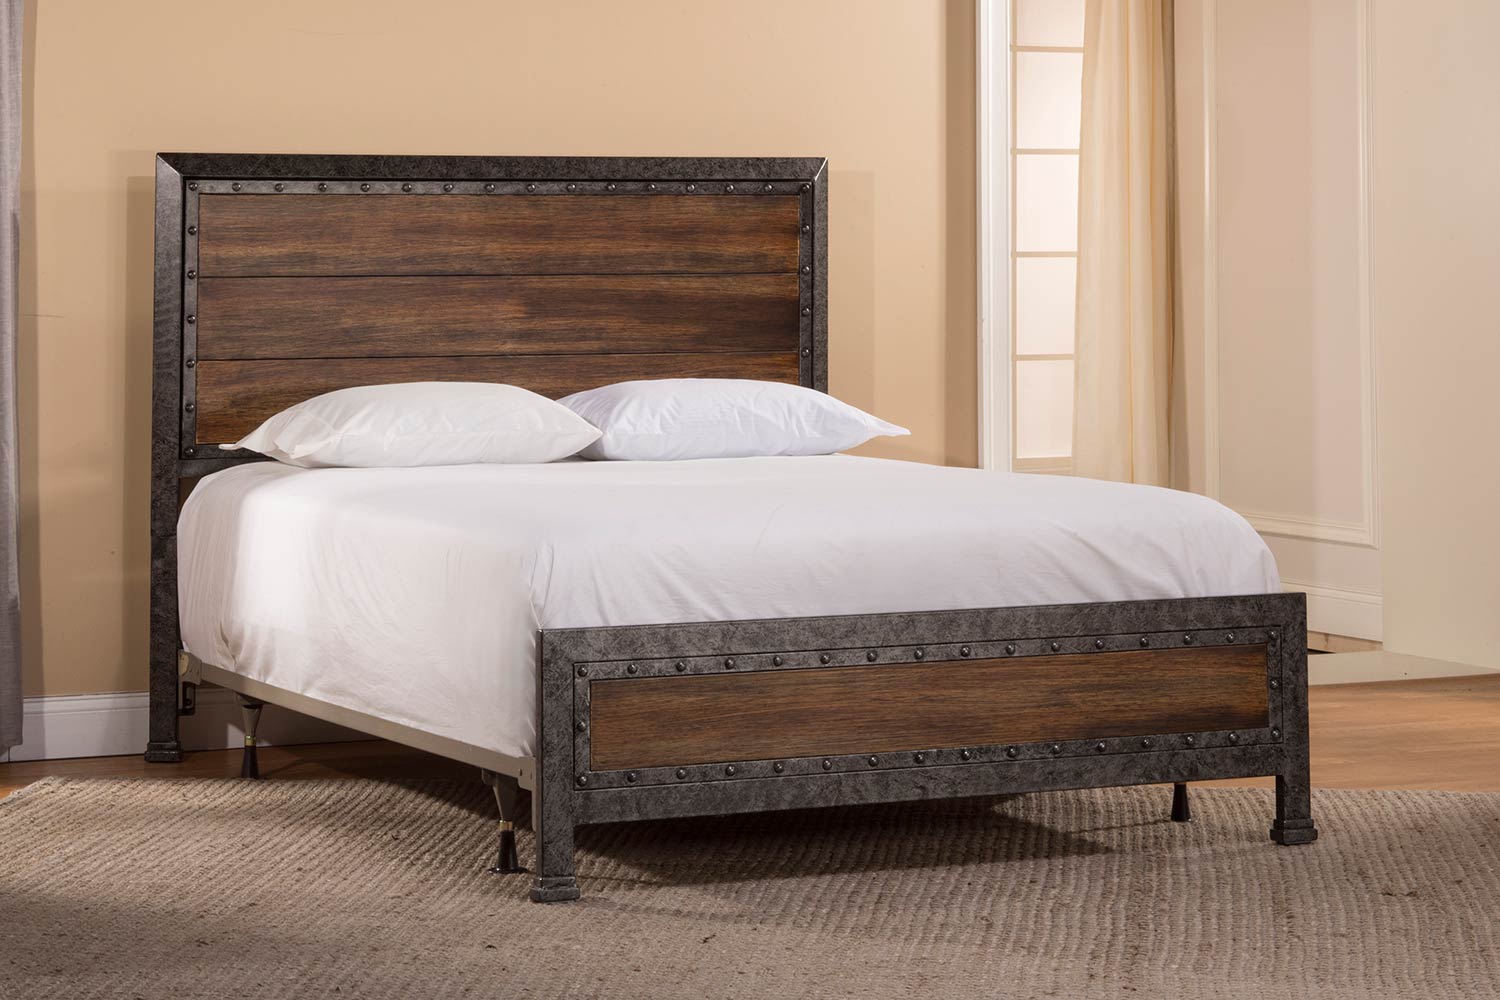 New! Hillsdale Furniture: Headboards and Beds